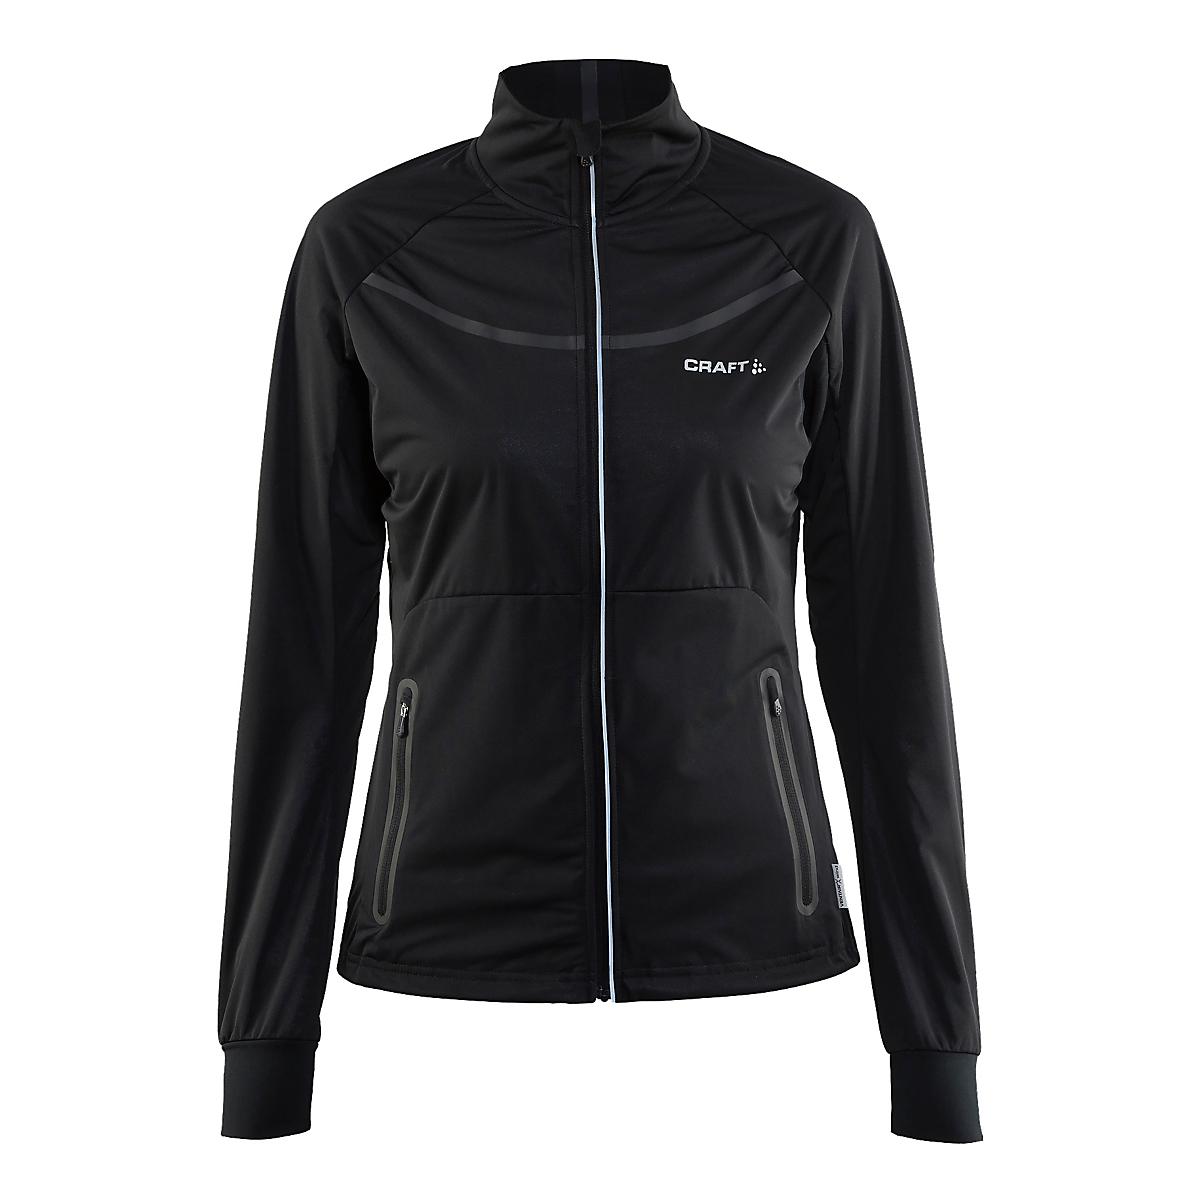 Womens Craft Intensity Cold Weather Jackets at Road Runner Sports